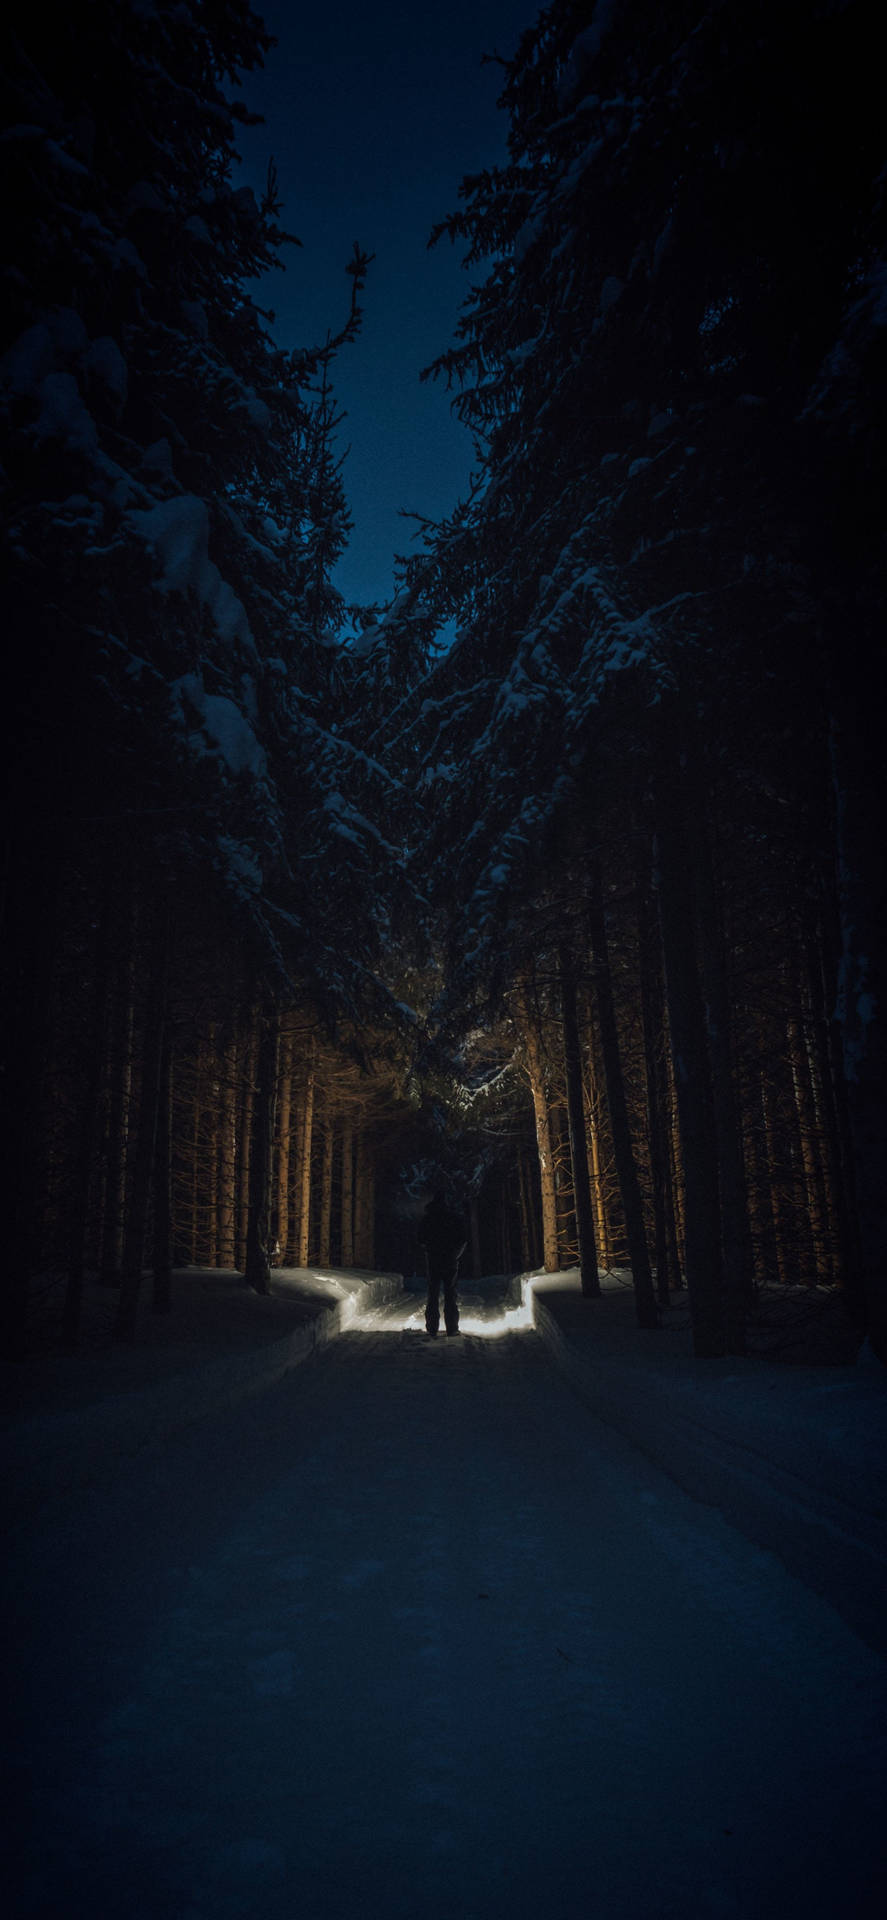 Dark Night In Snow-covered Forest Background